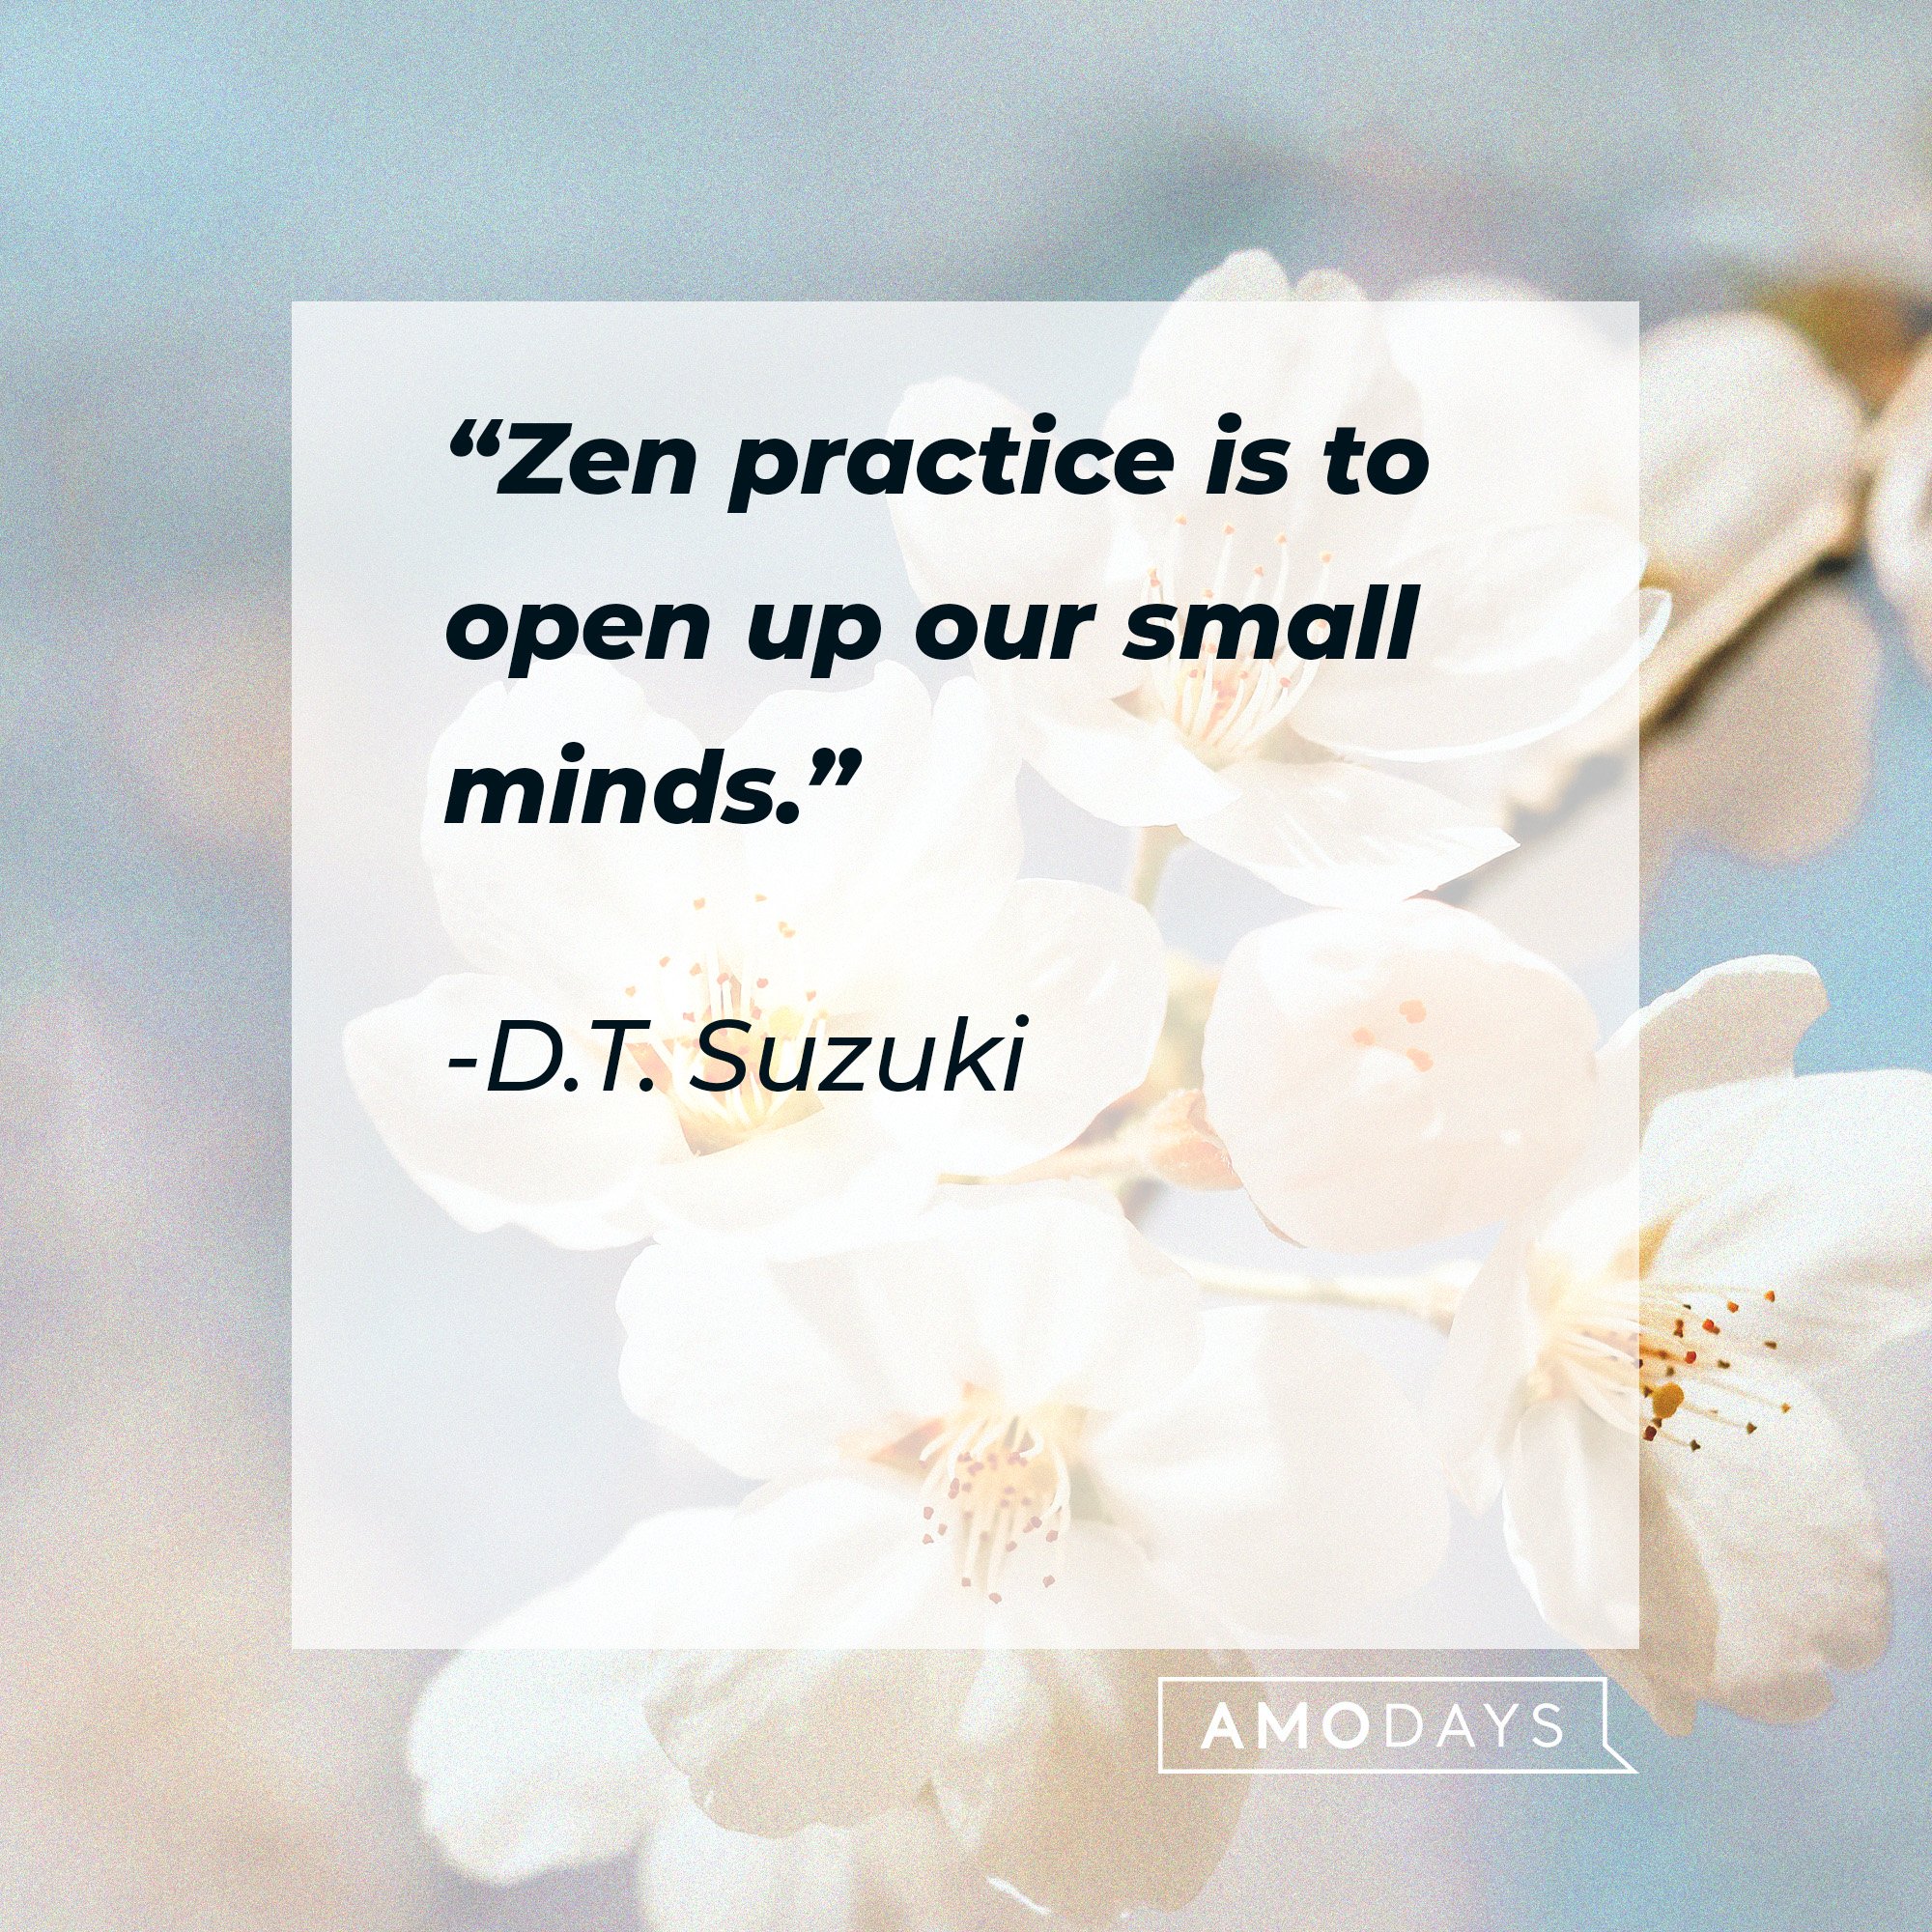  Shunryu Suzuki's quote: “Zen practice is to open up our small minds.” | Image: AmoDays